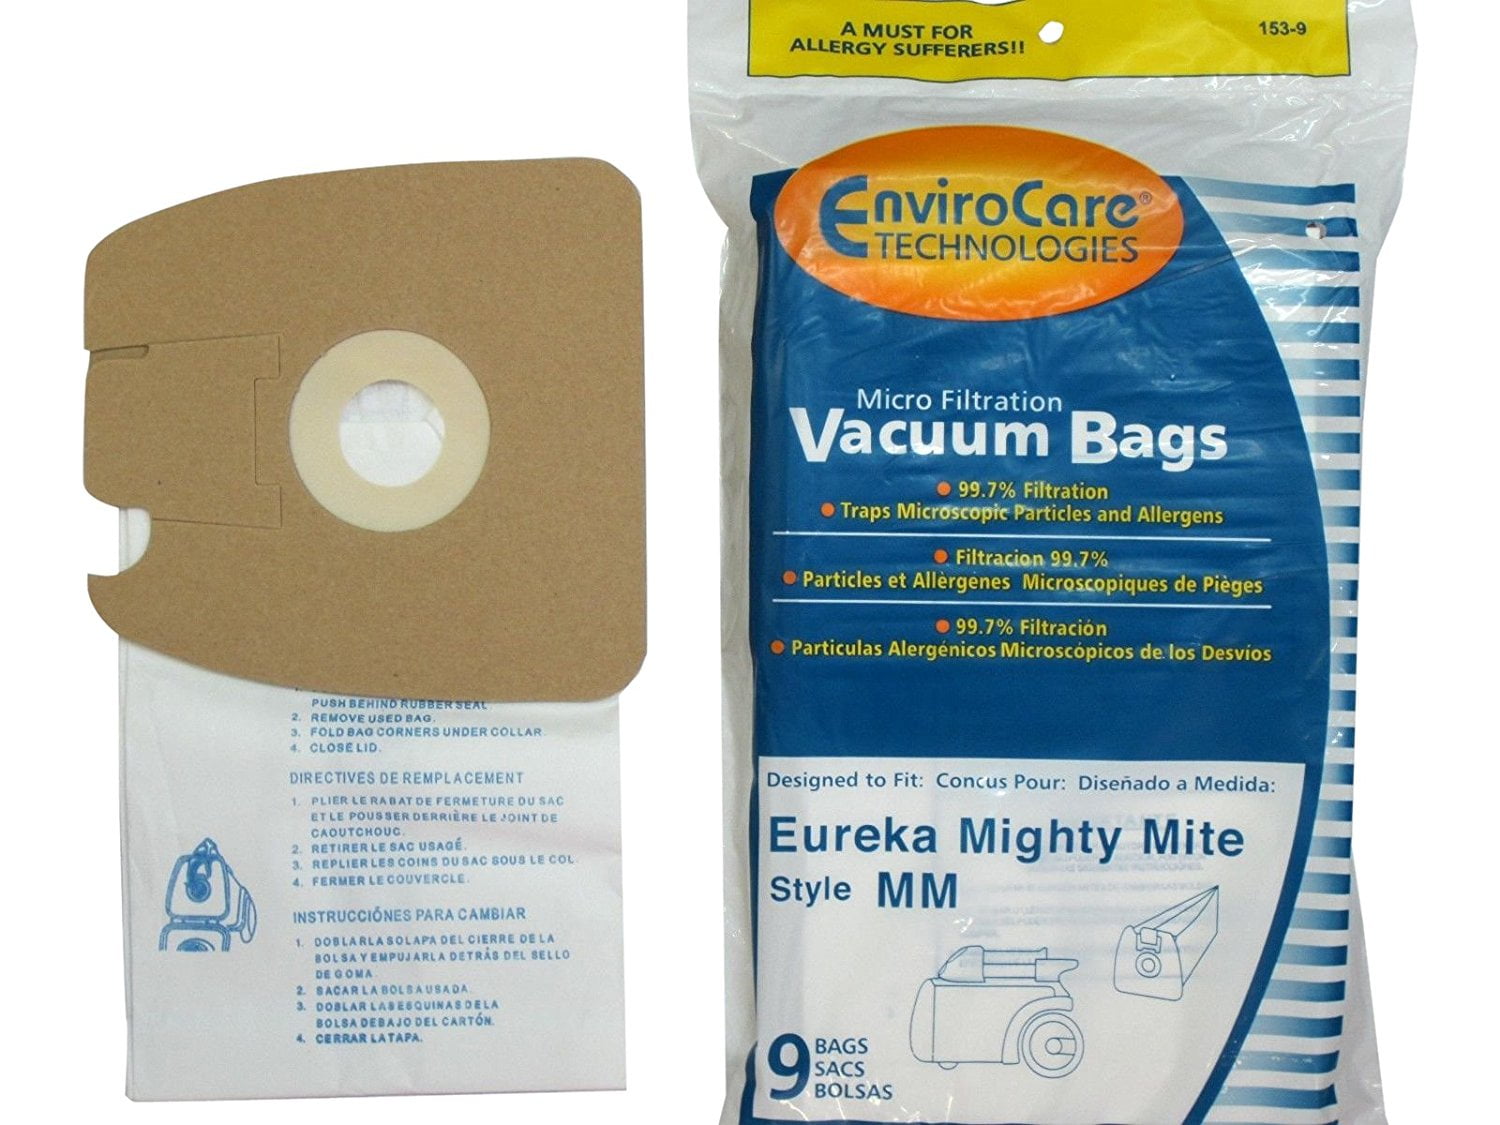 24 Eureka  C Mighty Might canister Vacuum Bags! 